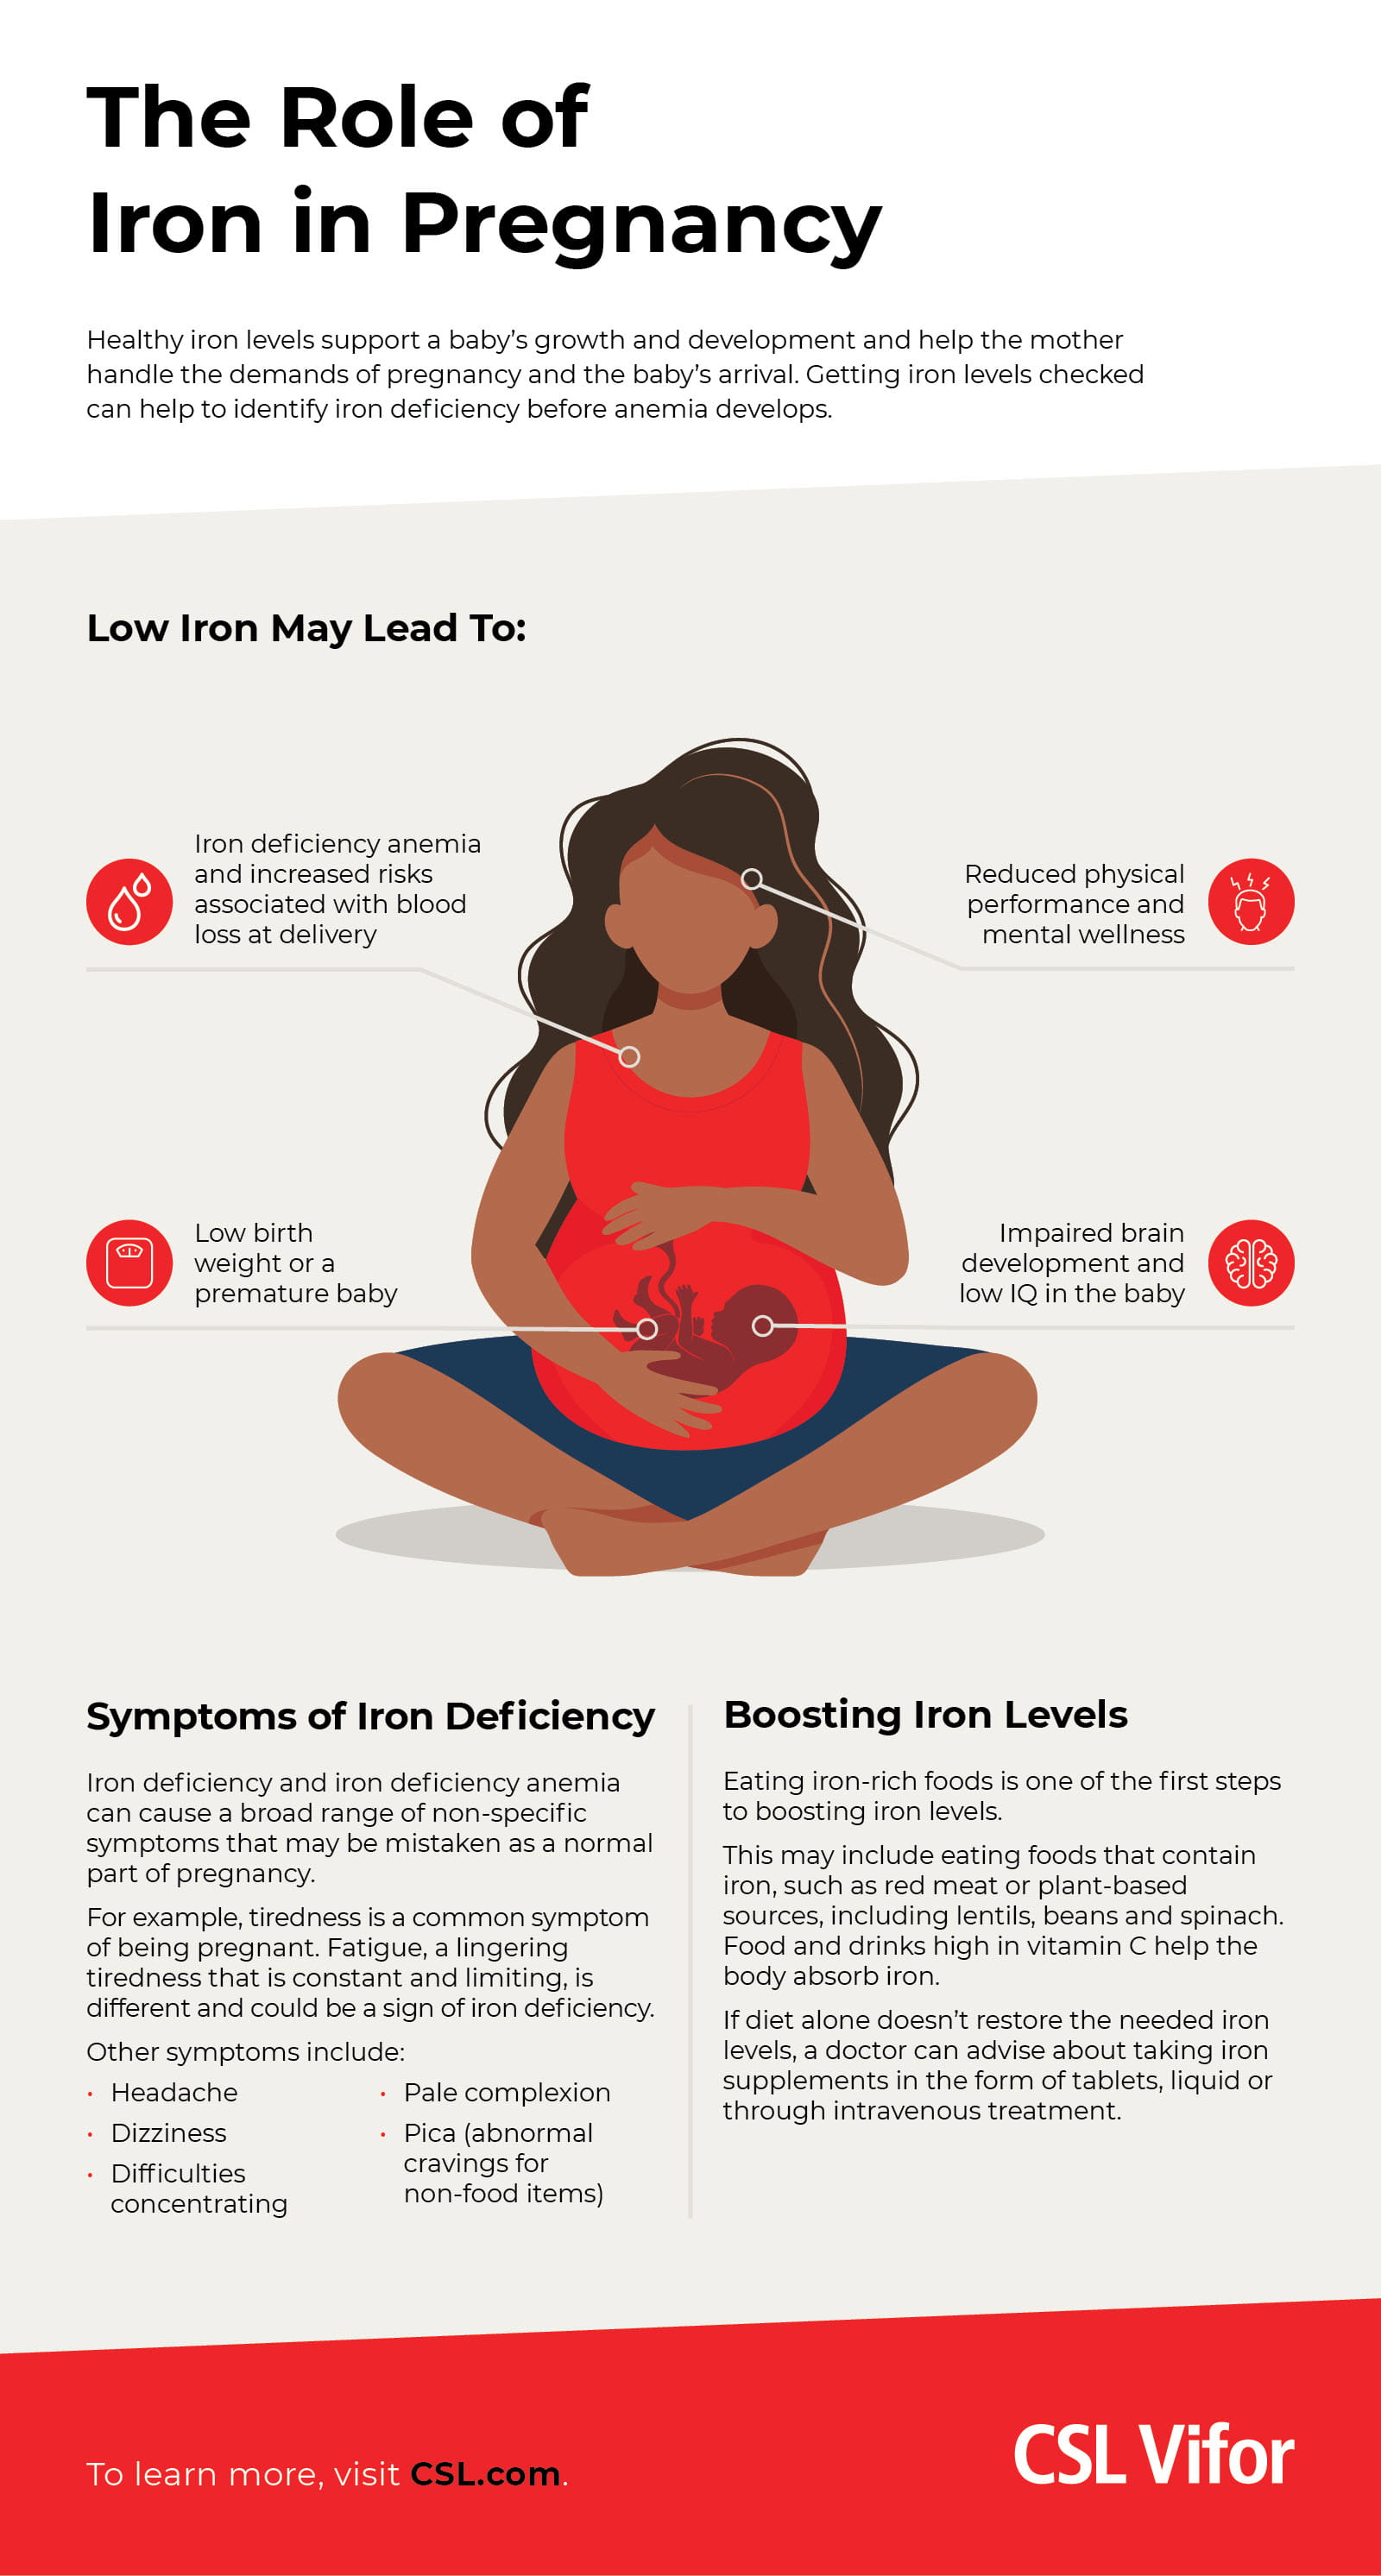 The Role of Iron In Pregnancy - infographic that details why iron levels are critical for a healthy mother and baby